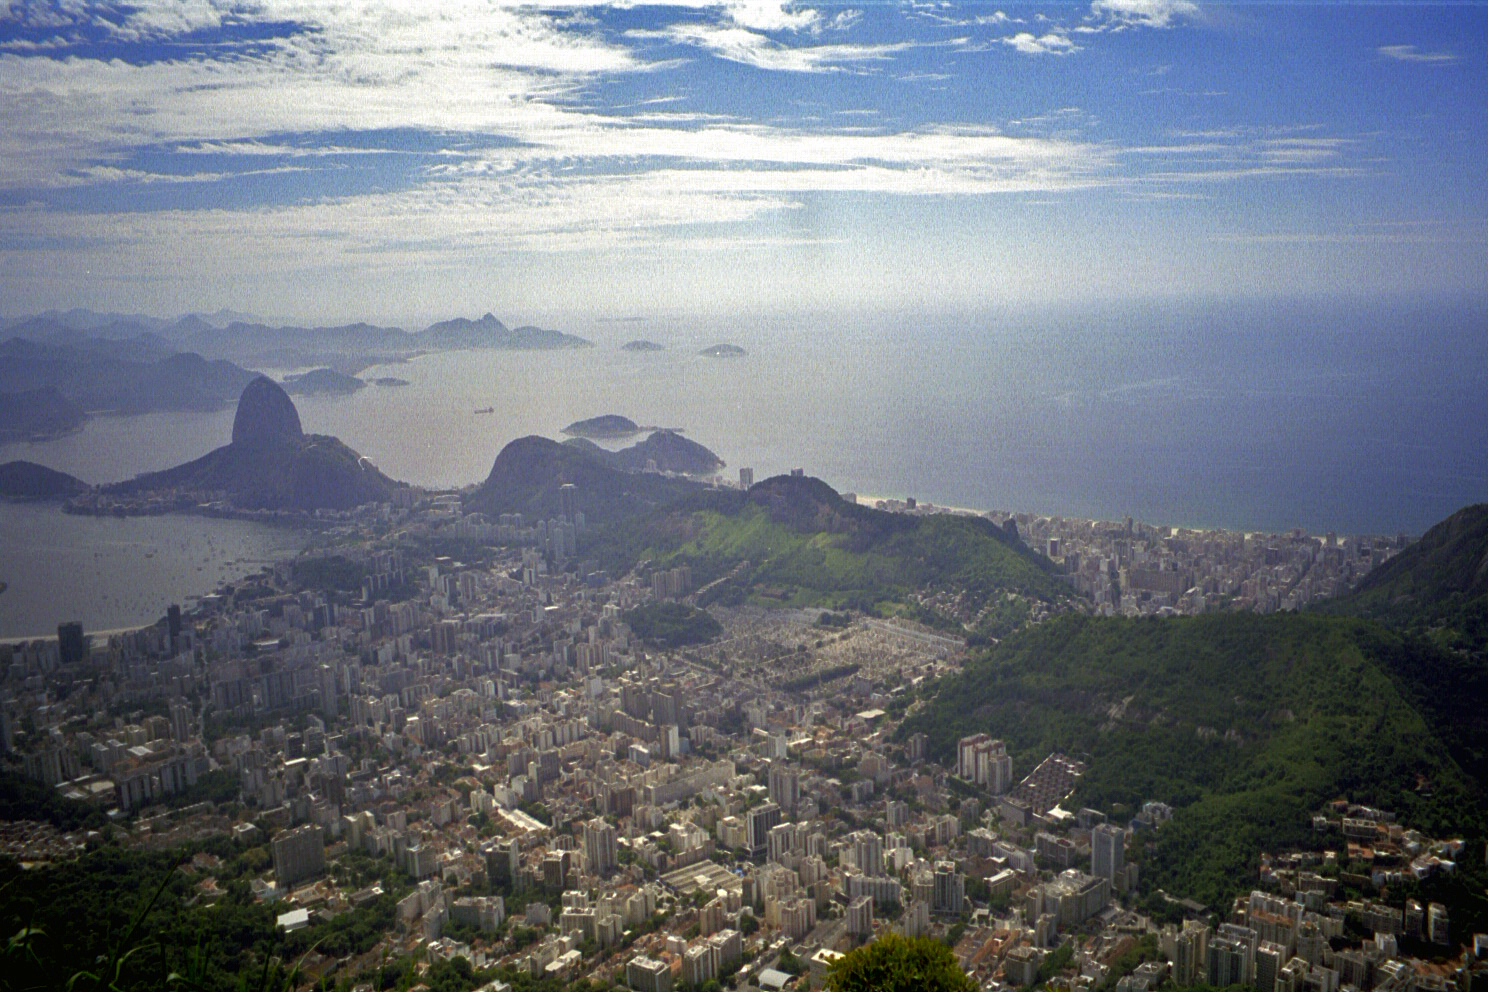 Rio de Janeiro (note: this image is not suitable for large prints)